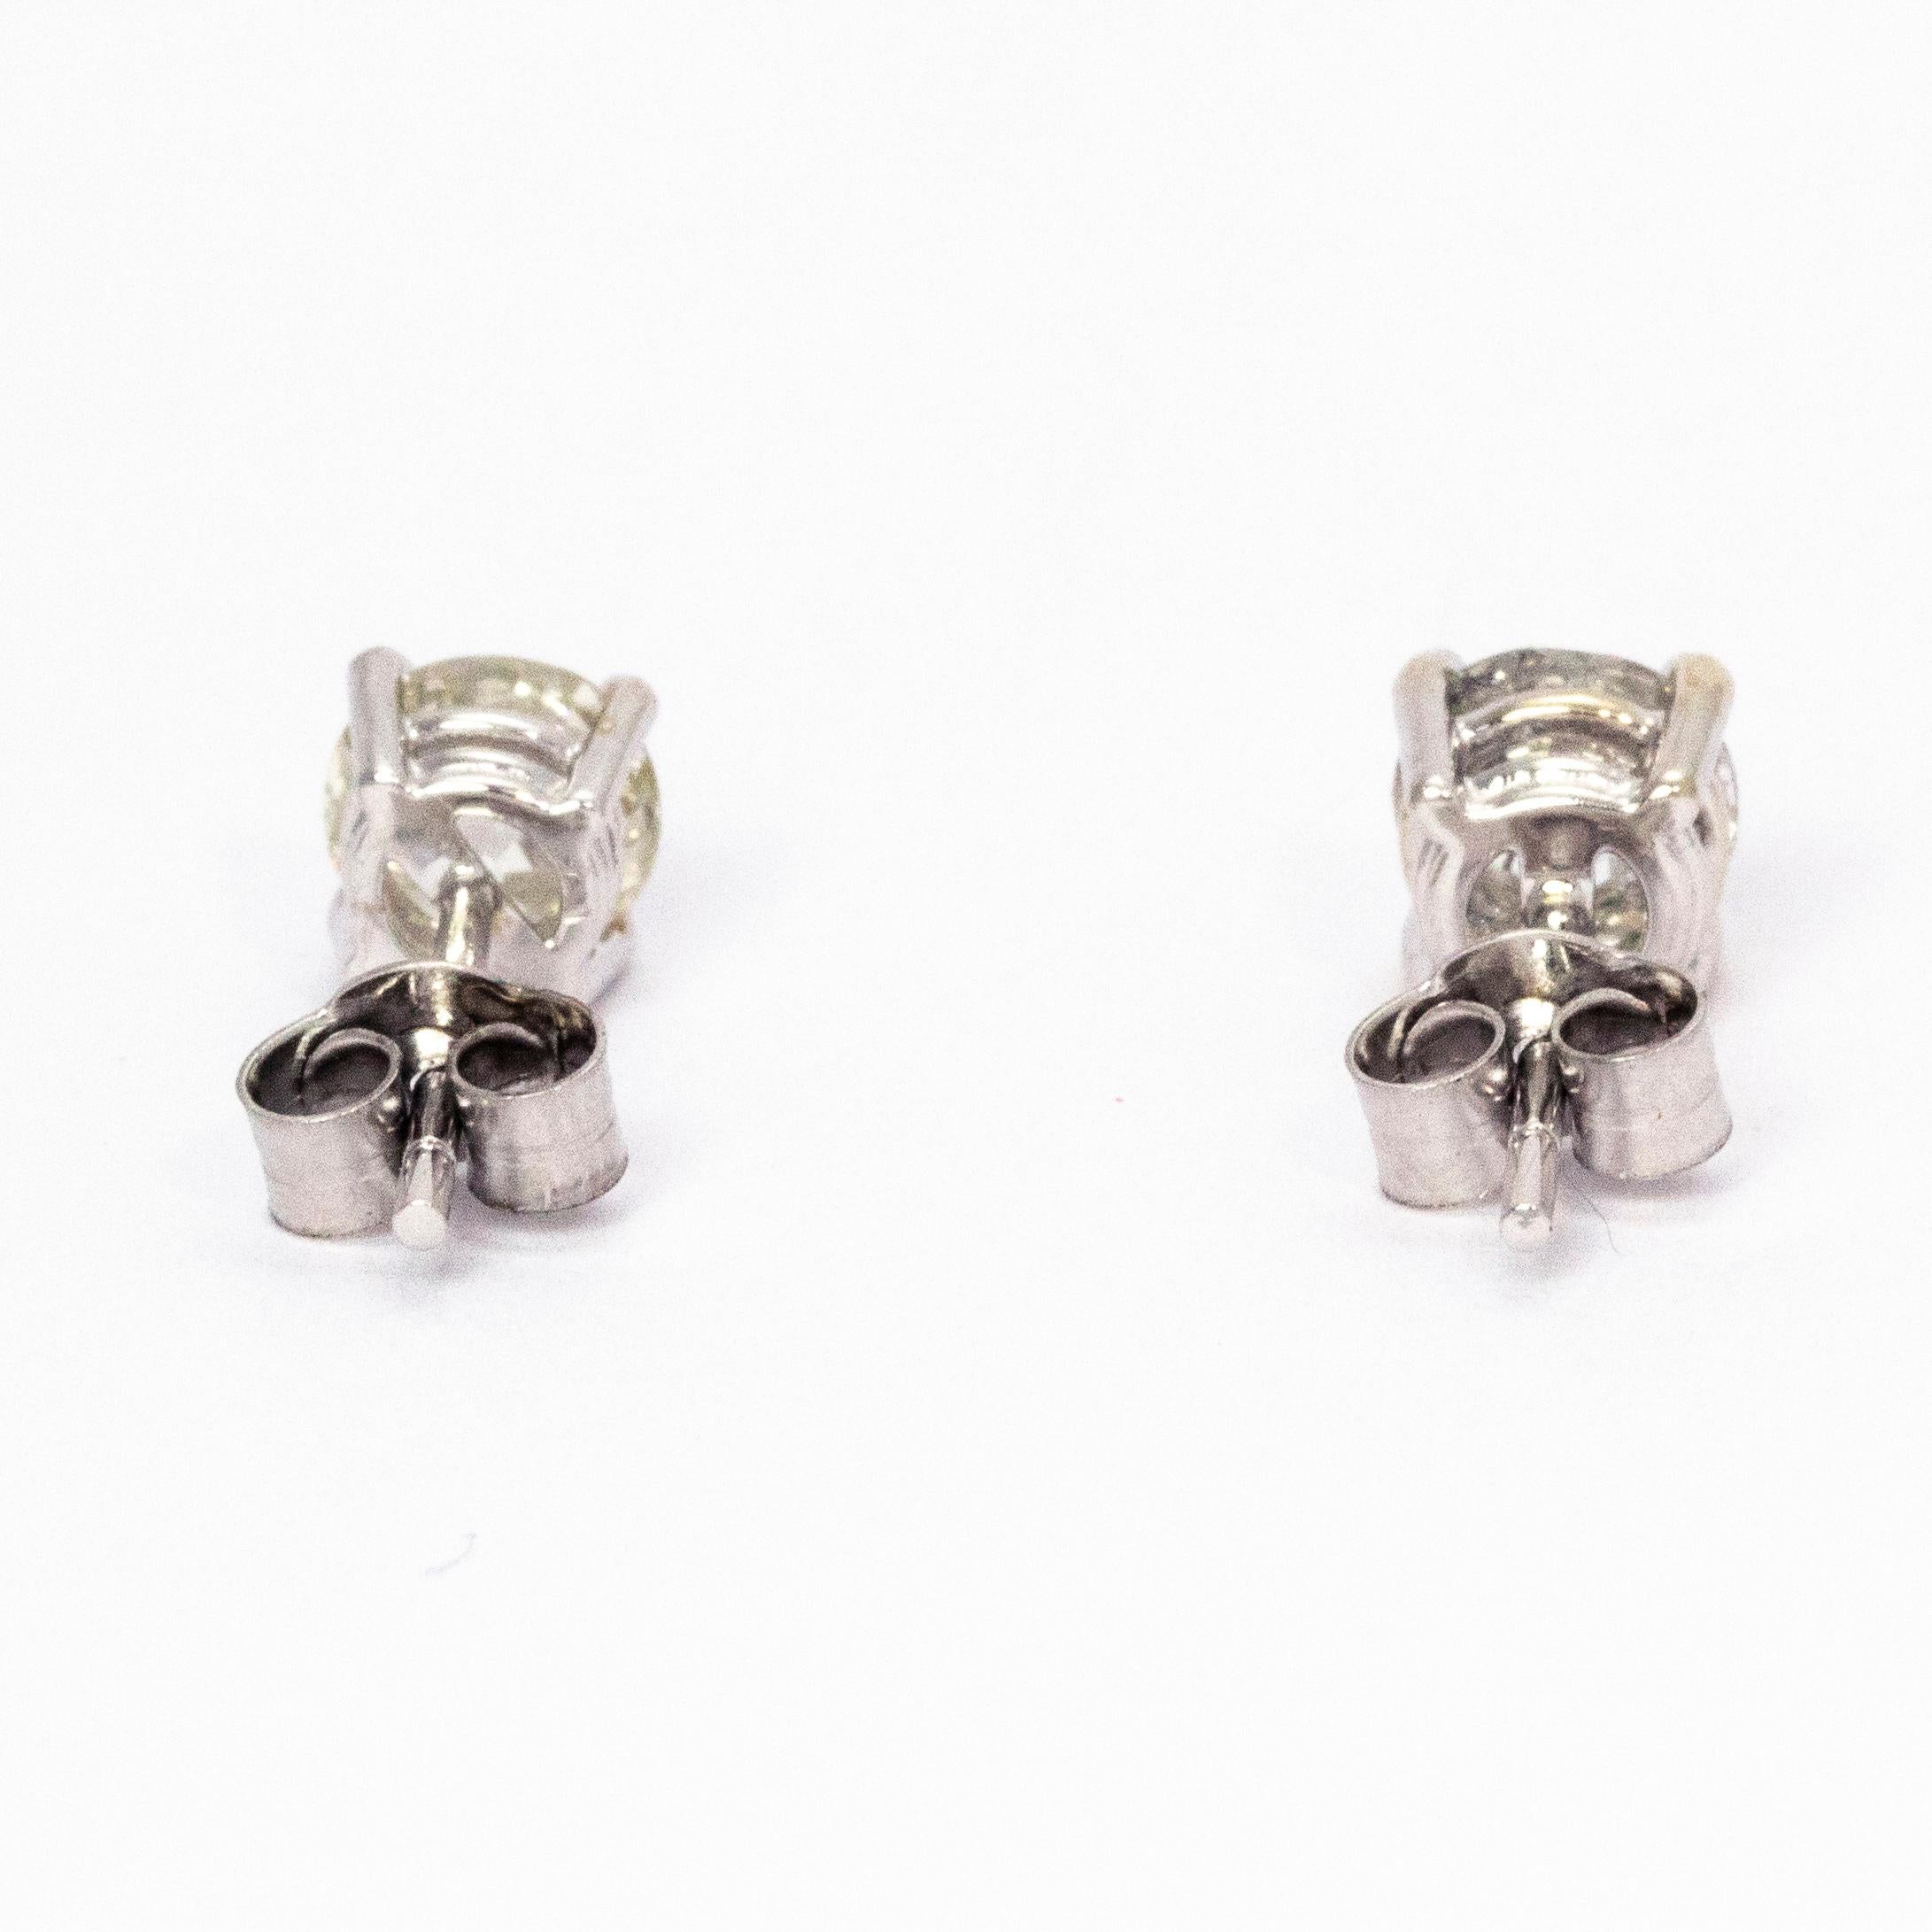 Diamond Stud Earrings 1.34 Total Carat Weight Set in 18 Carat White Gold In Good Condition For Sale In Chipping Campden, GB